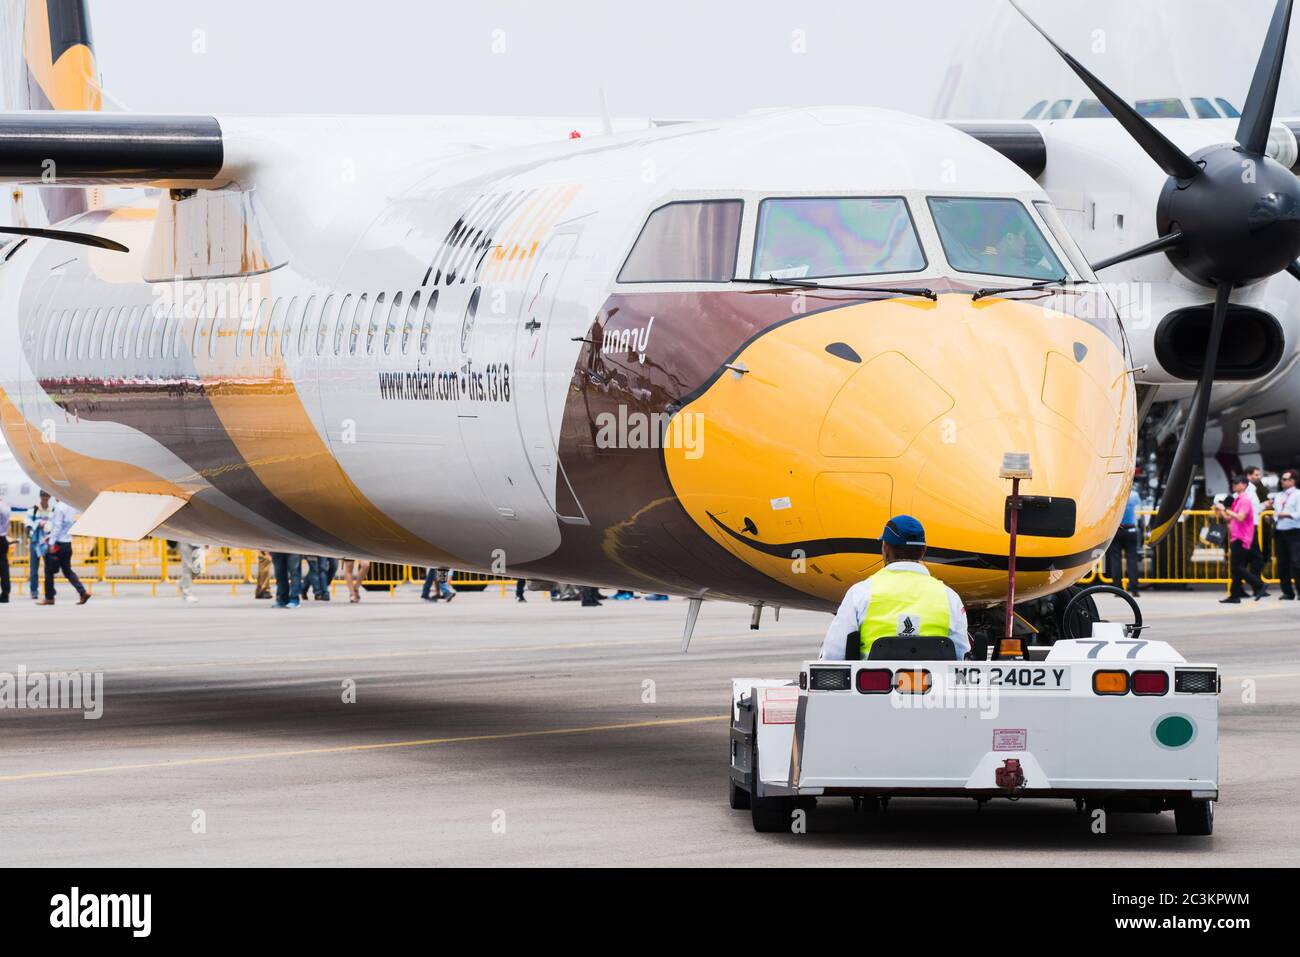 Singapore - February 17, 2016: Front of a Bombardier Q400 NextGen in Nok Air livery being pushed into position during Singapore Airshow at Changi Exhi Stock Photo